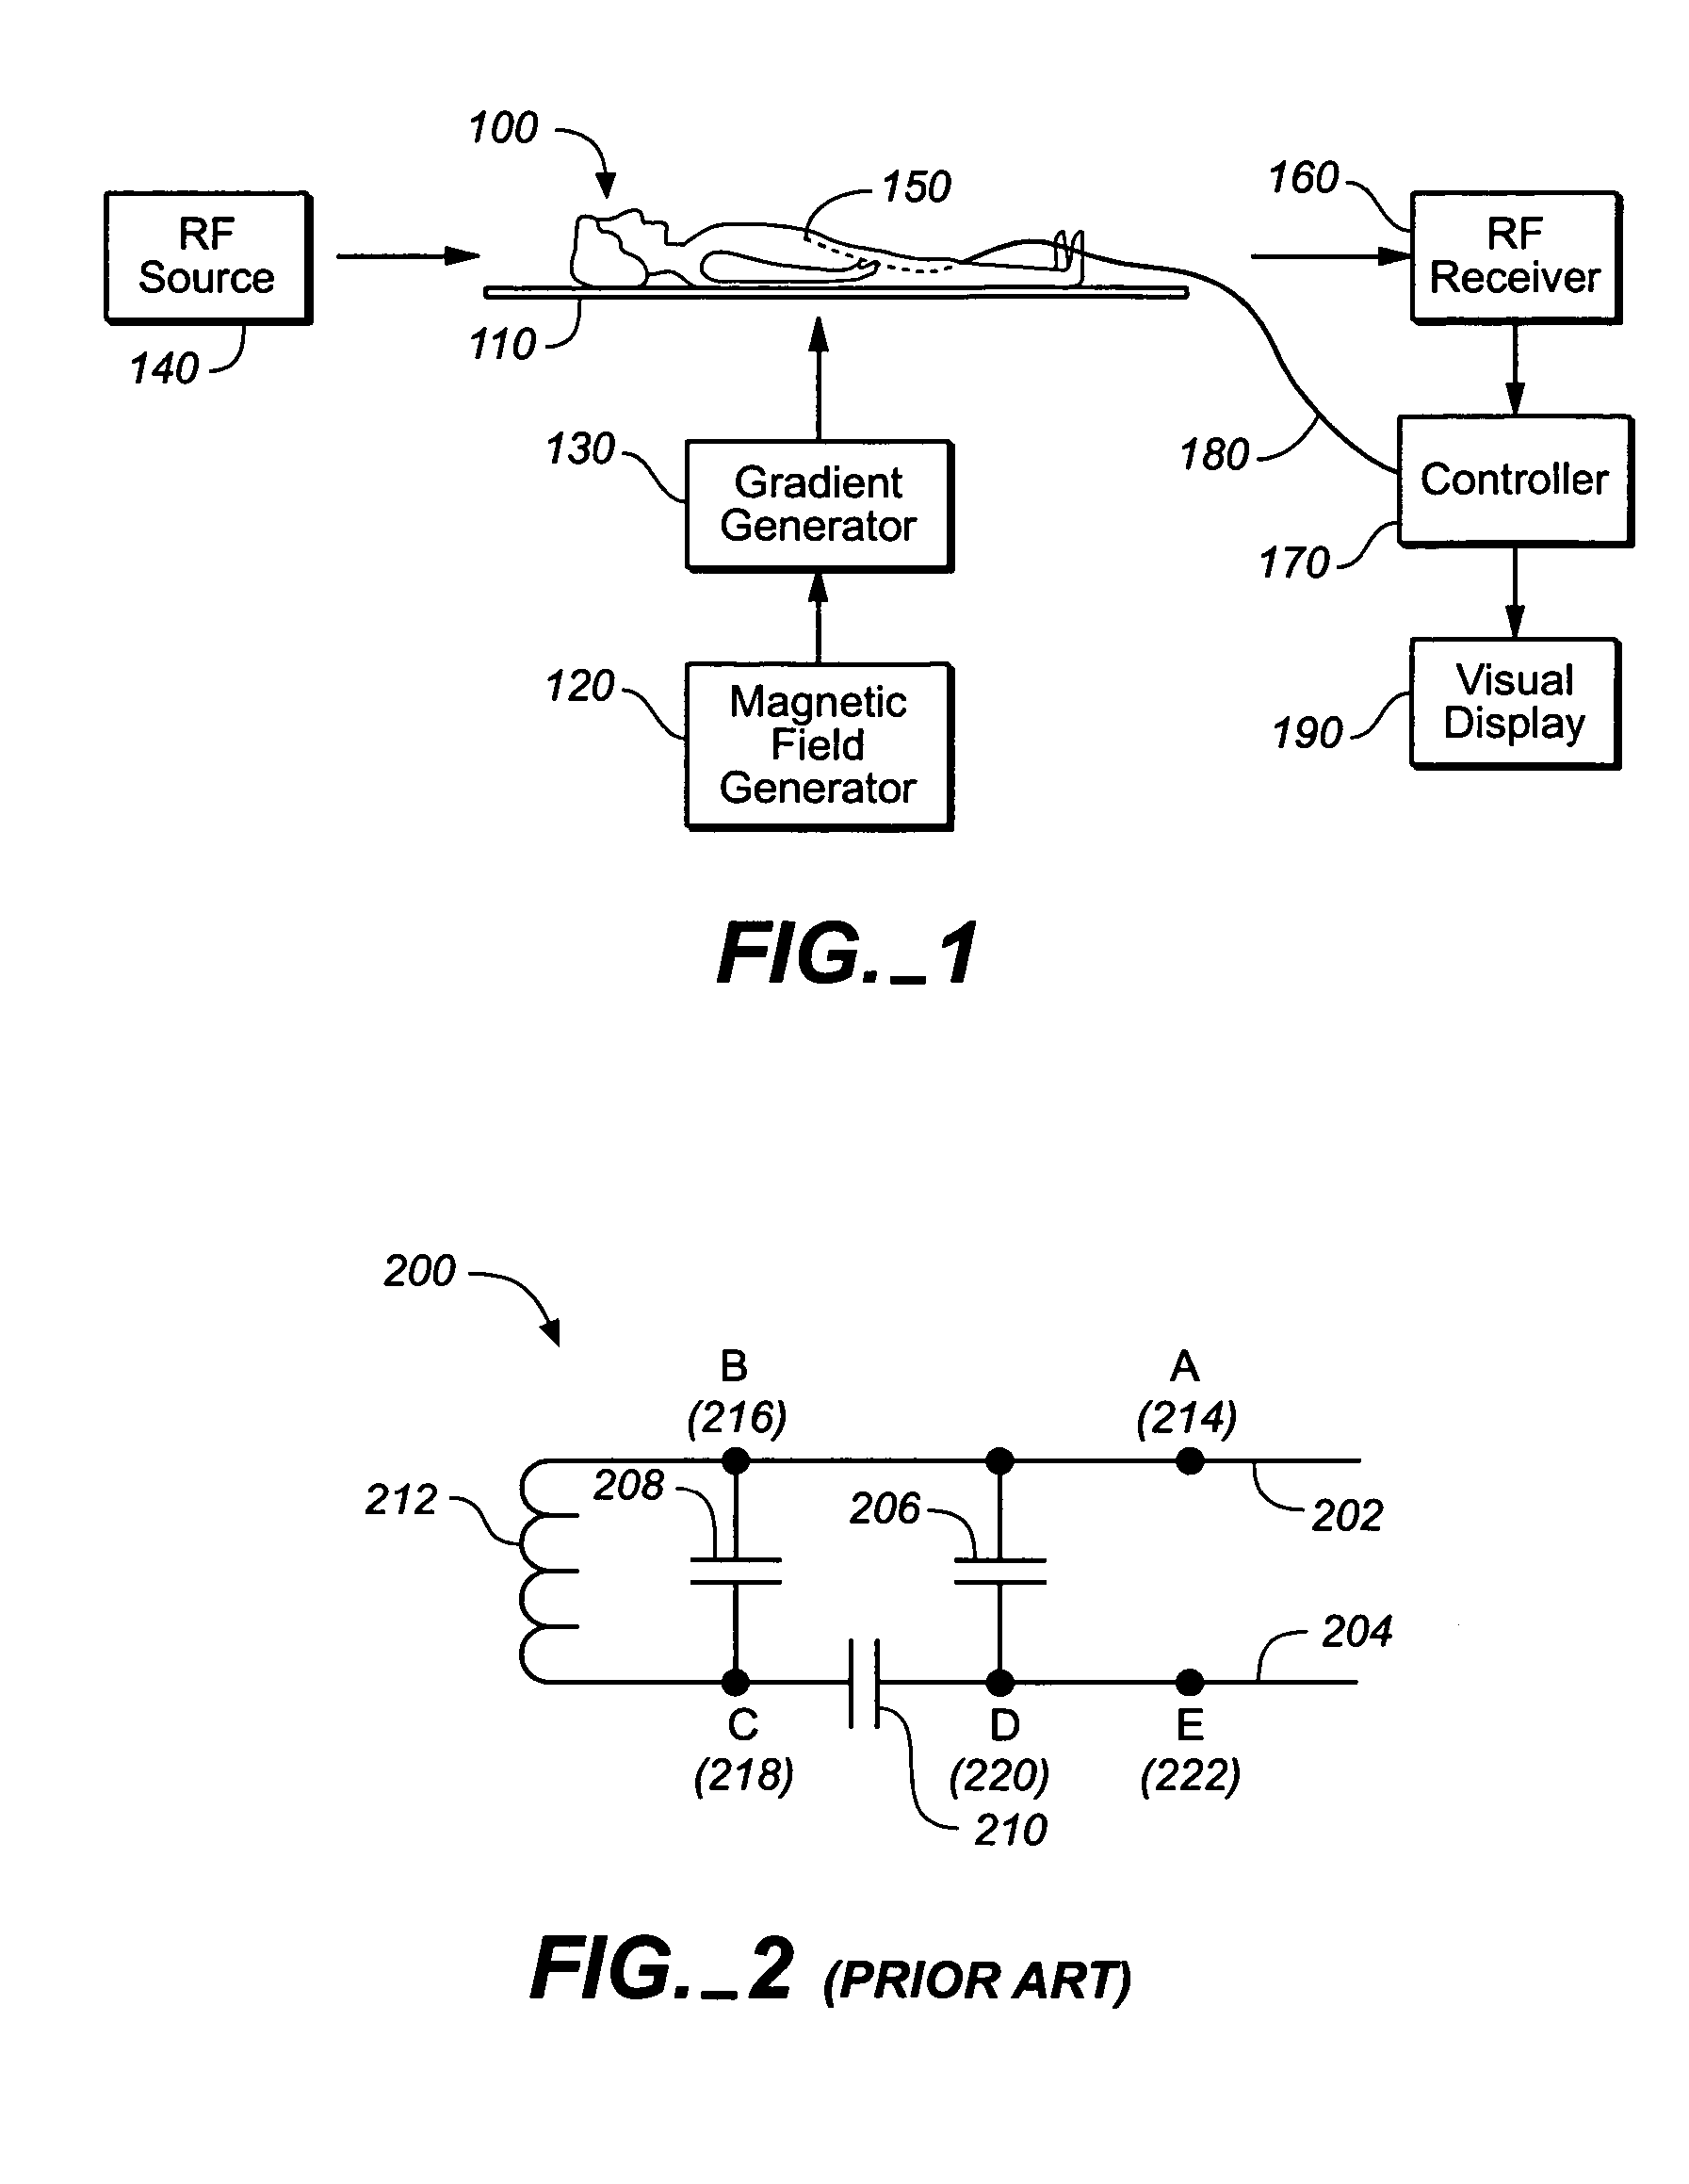 Apparatus and construction for intravascular device